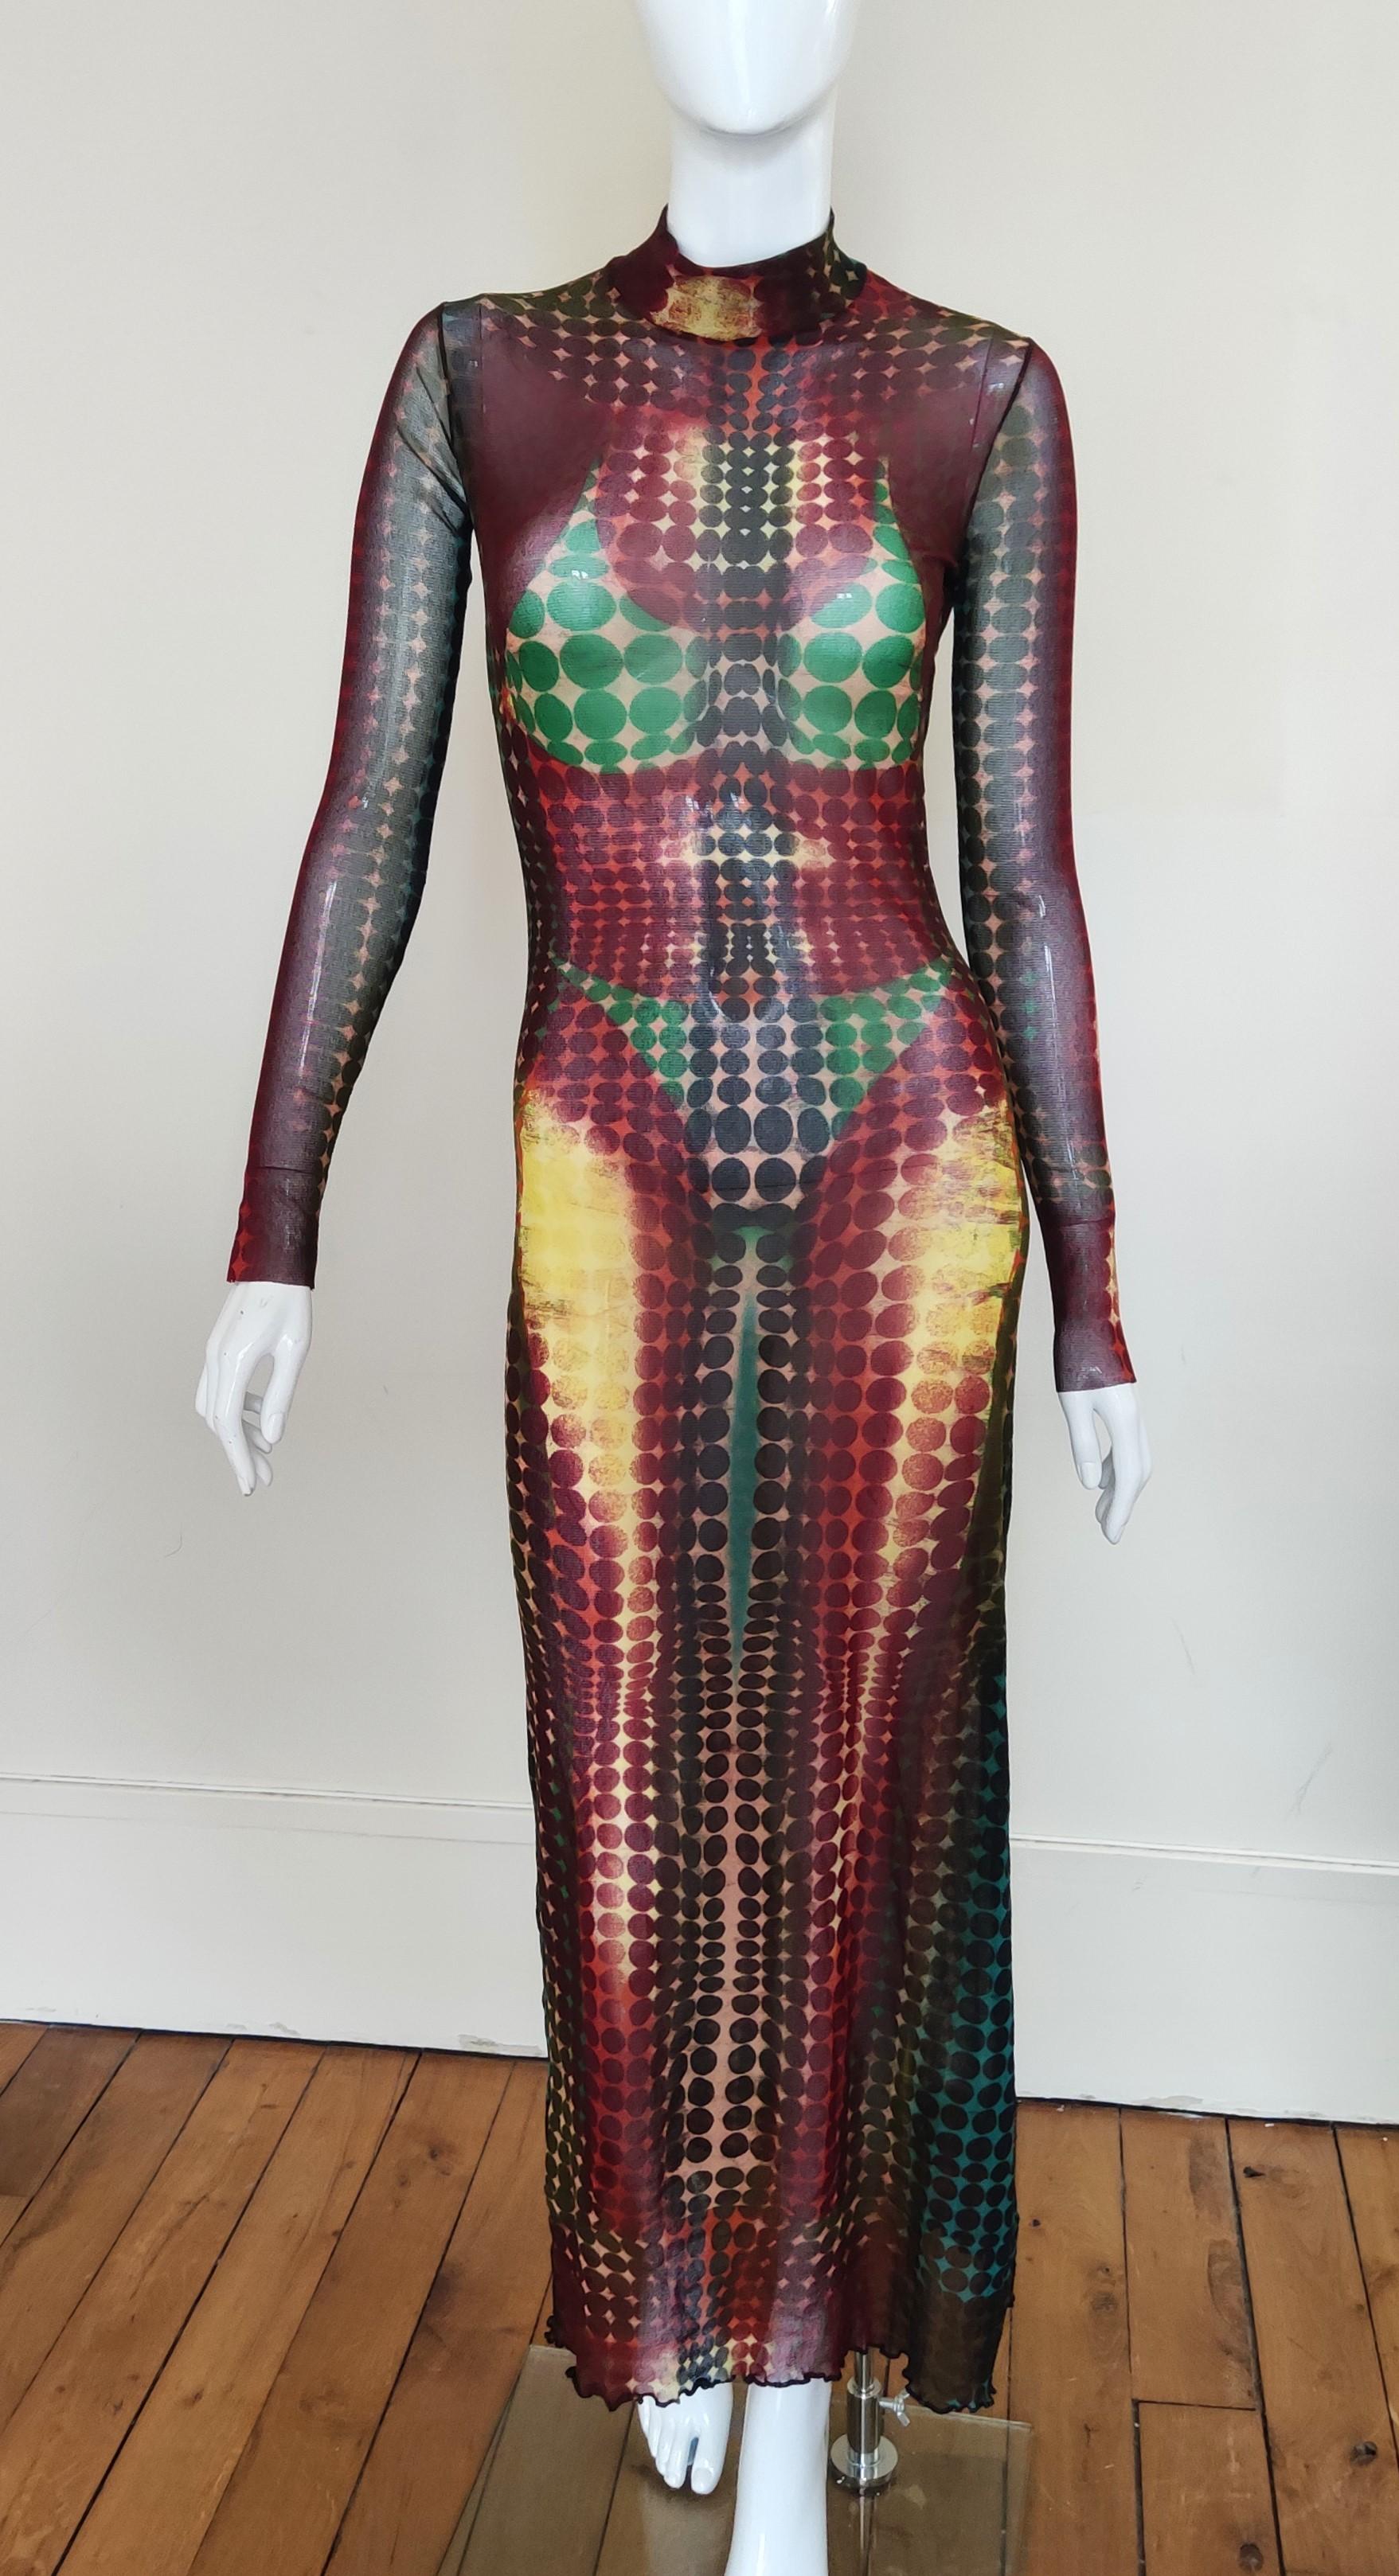 Iconic mesh butterfly dress from Jean Paul Gaultier!
From the 2003 Spring Summer Collection!!!

Very good Condition!
2 layers.

A dress from the same collection was worn by Kendall Jenner at the exhabition of Renell Merdano in London, 17 February